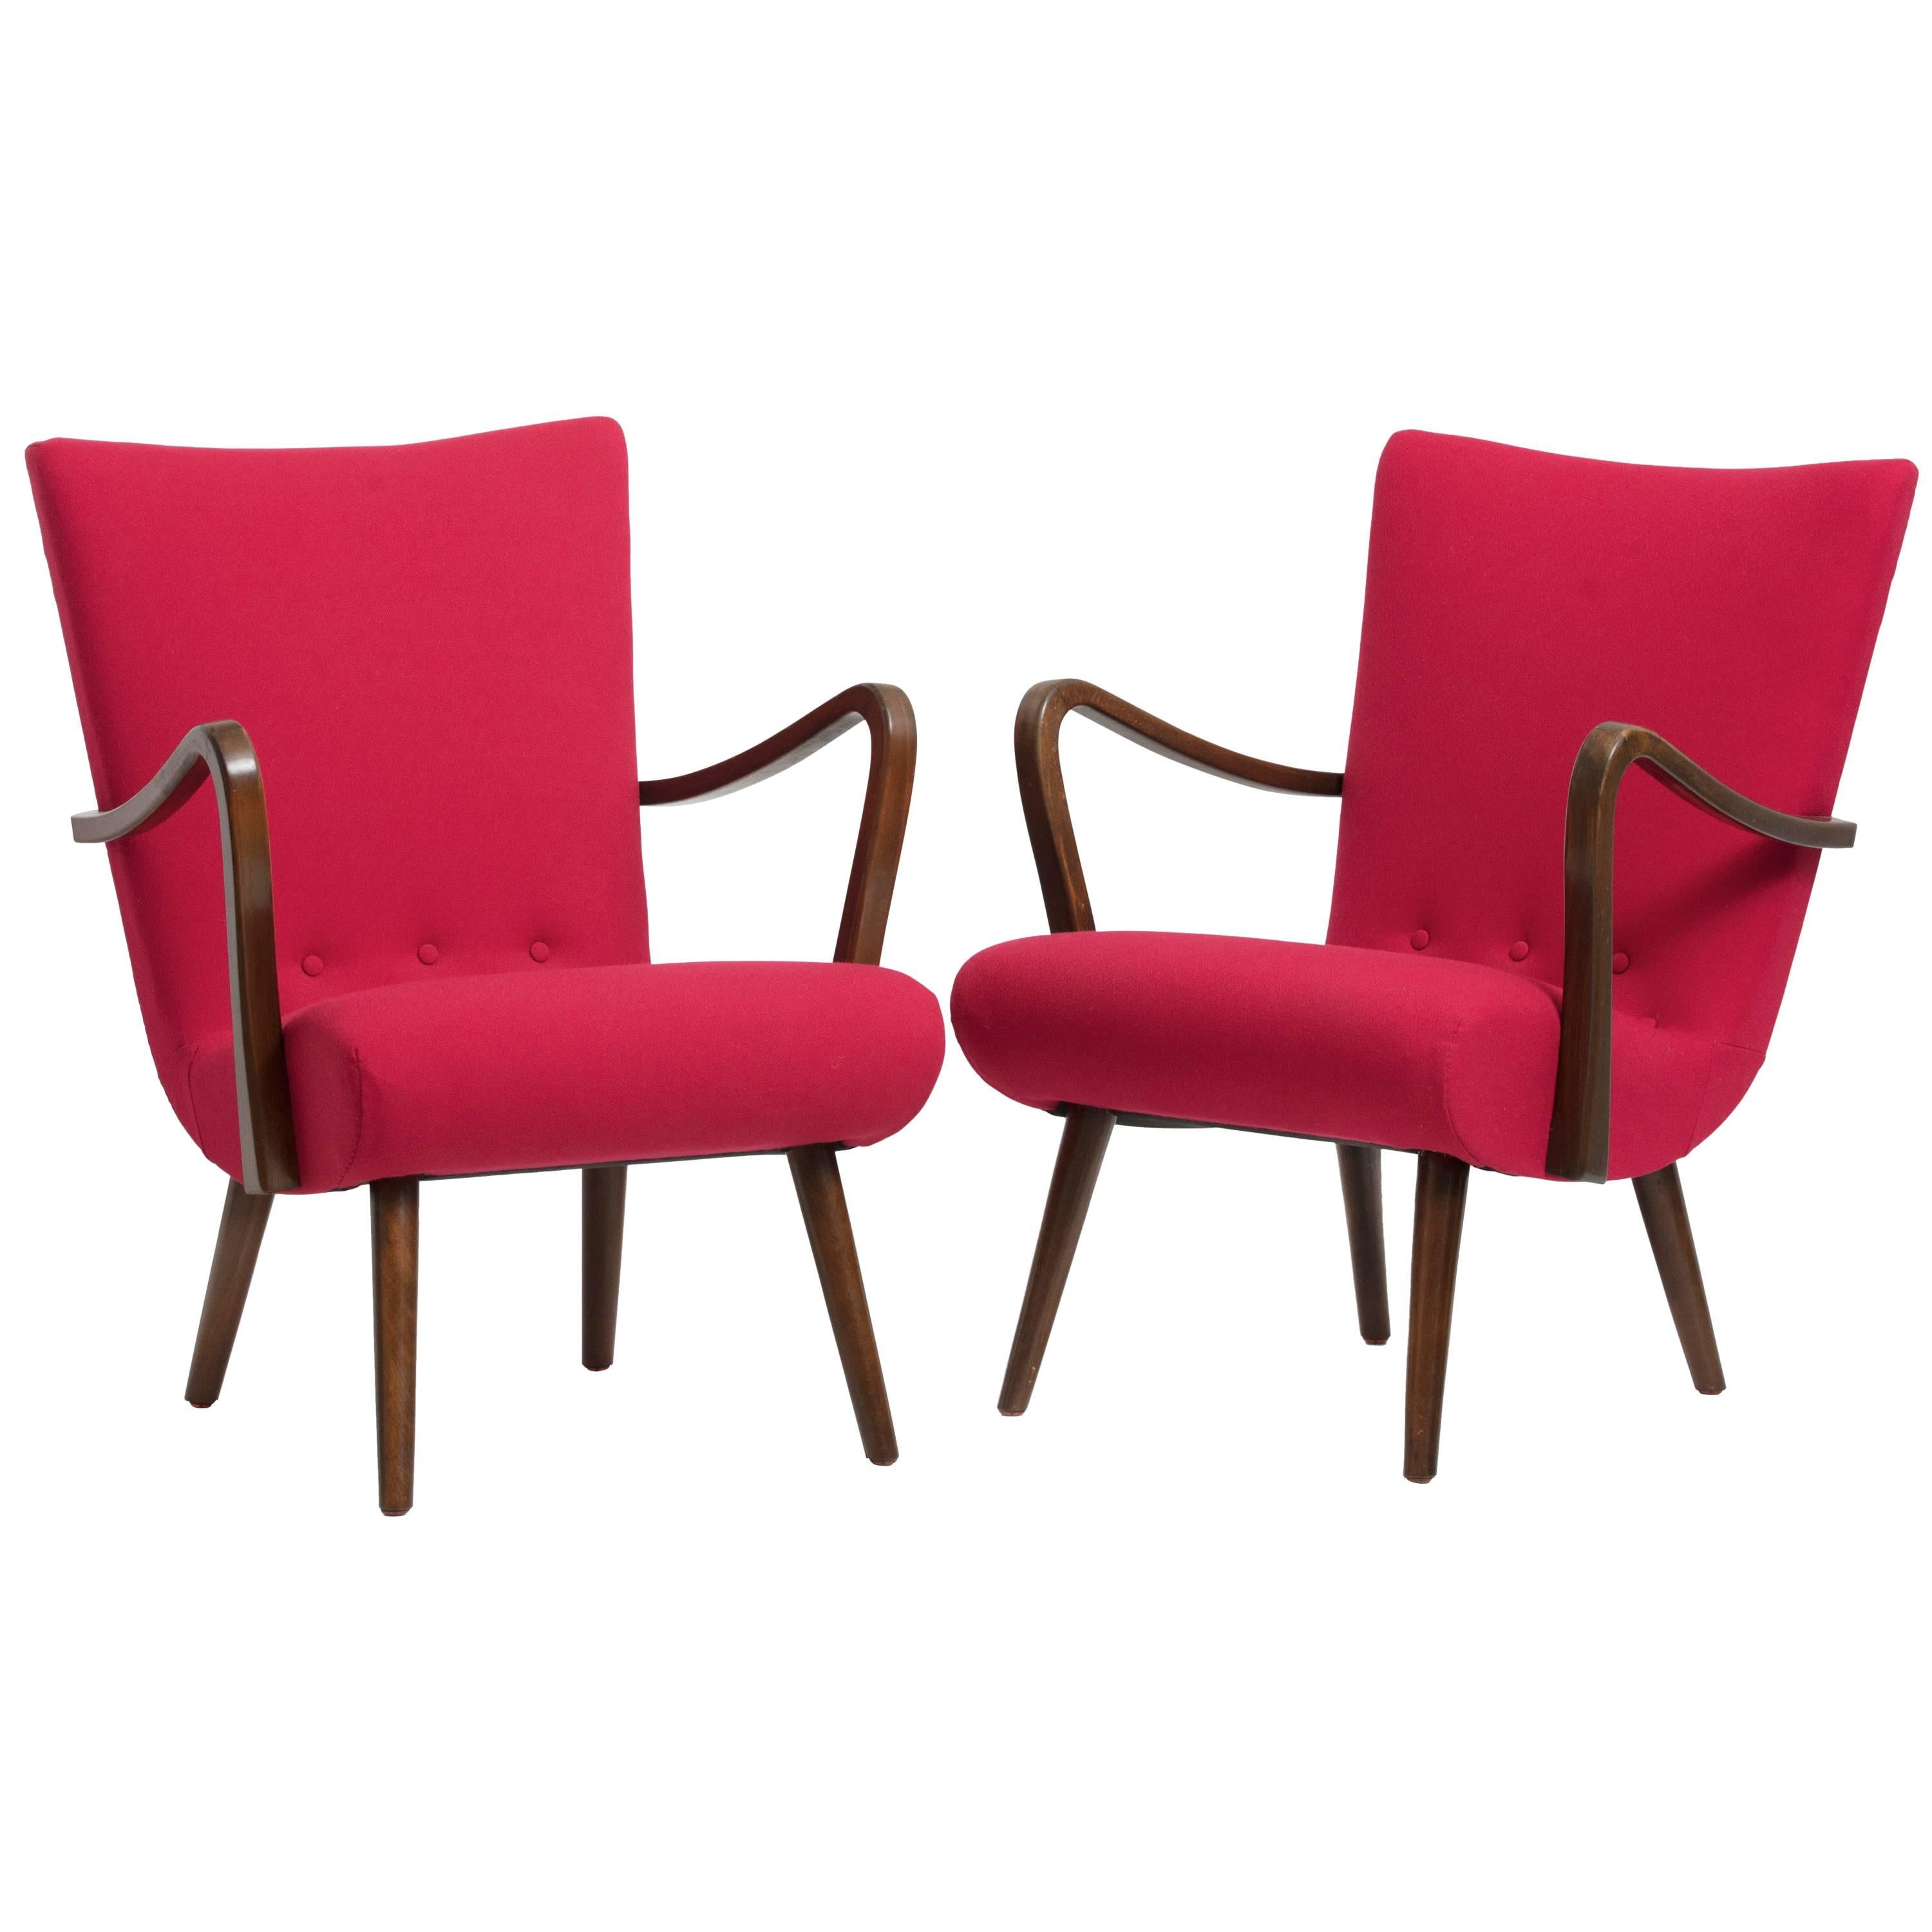 Pair of Danish Produced Armchairs, New Wool Upholstery by Kvadrat, 1940s For Sale